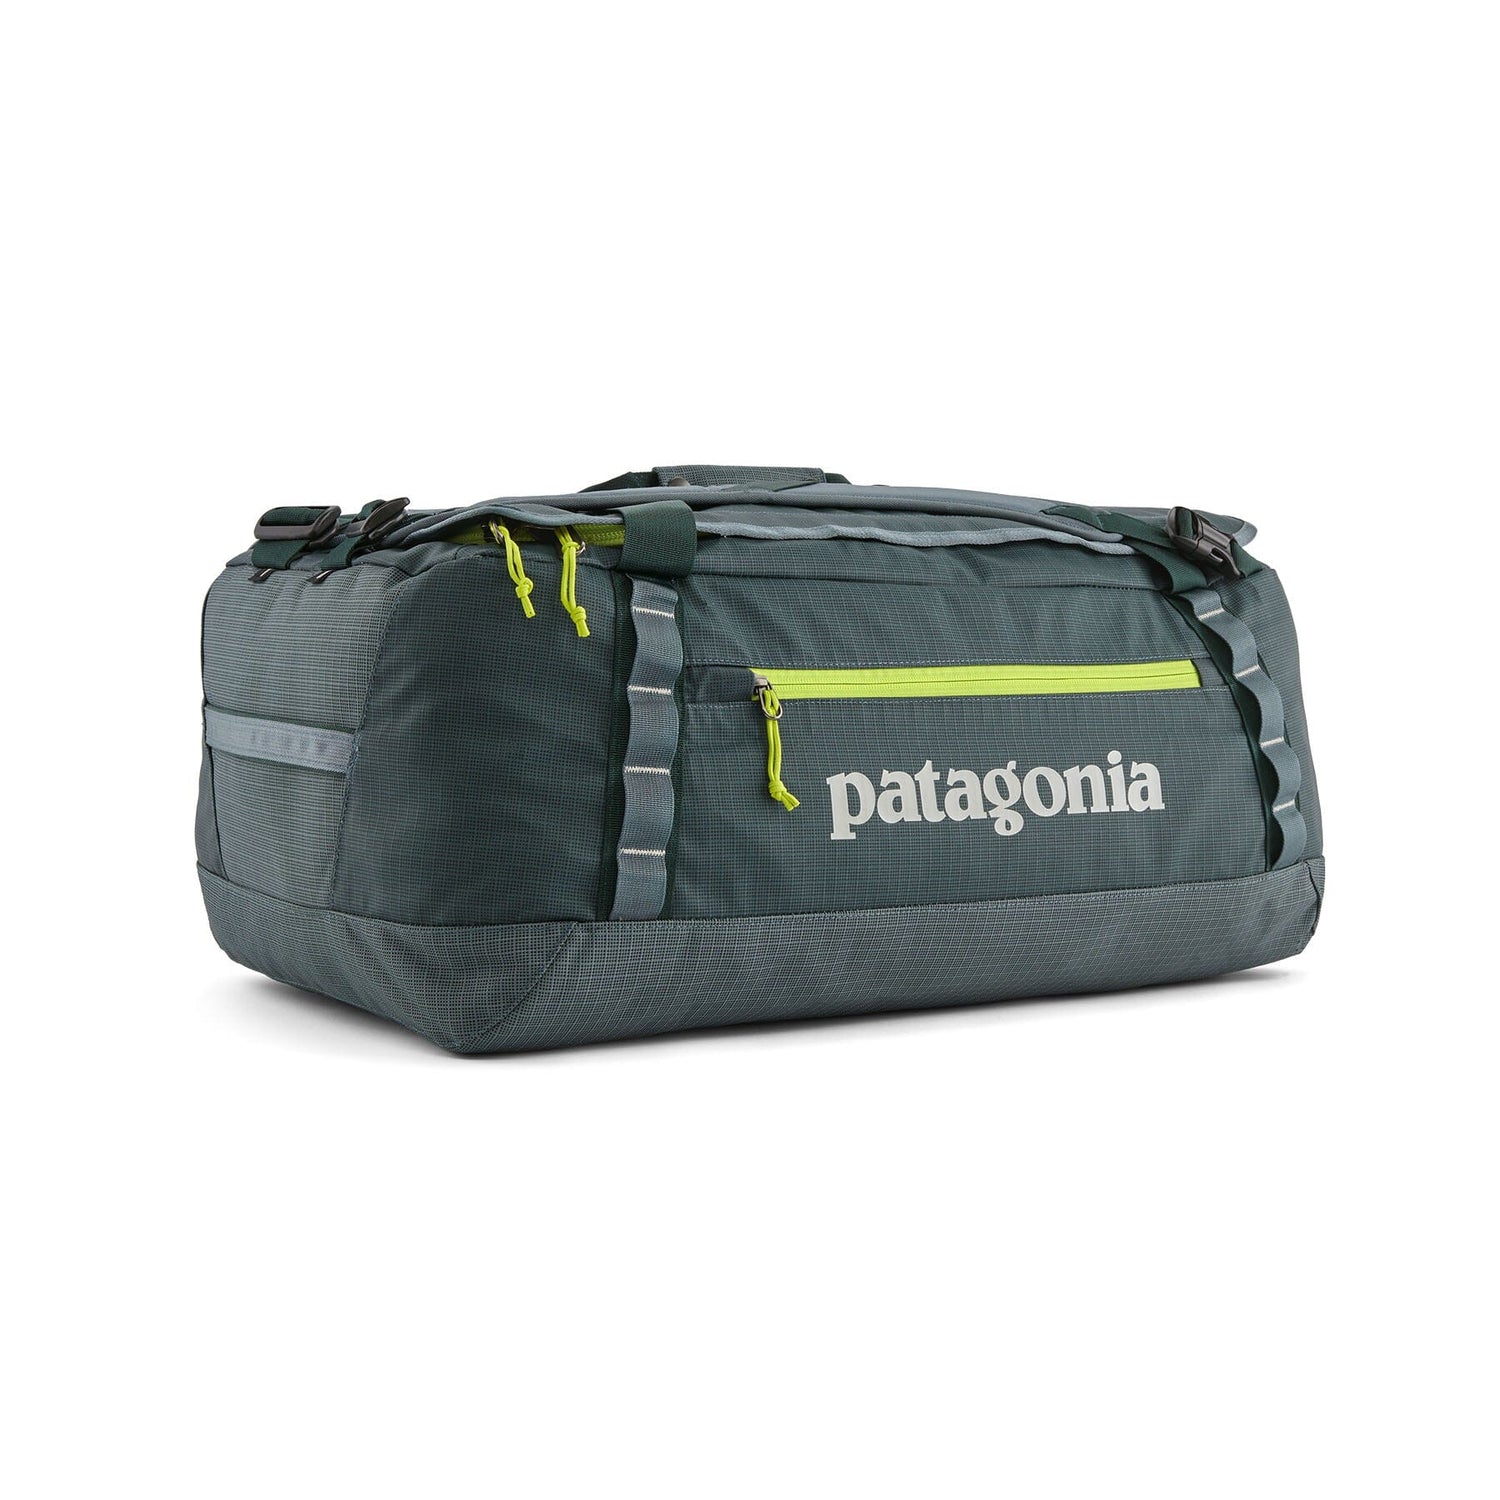 Patagonia Black Hole Duffel 55L - 100% postconsumer recycled polyester Nouveau Green Bags